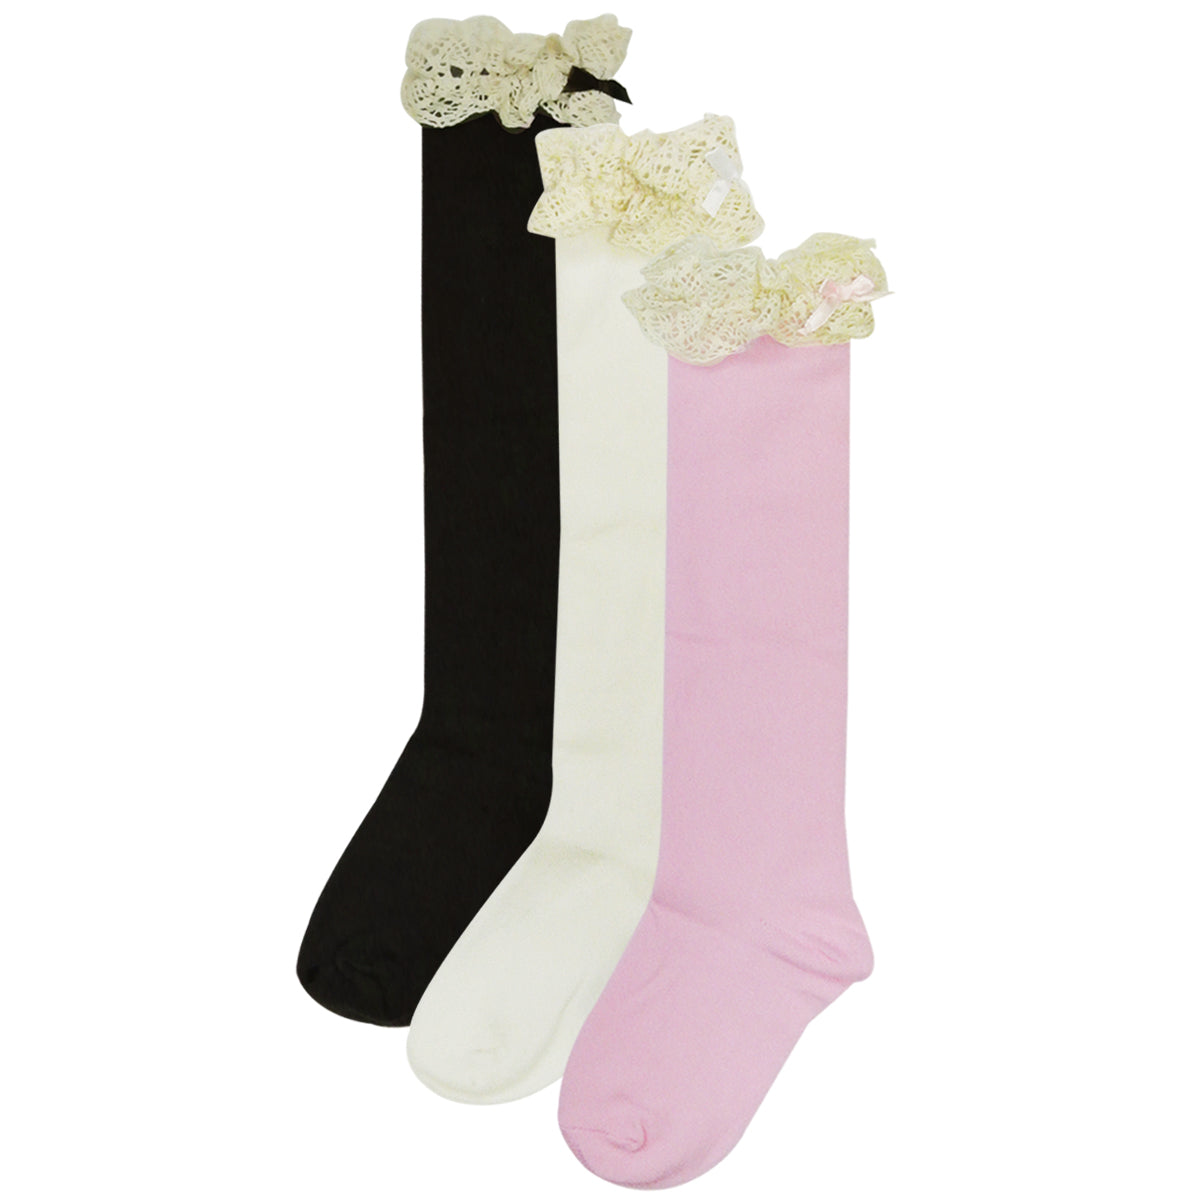 Wrapables Lace Ruffles and Bow Knee High Girl Socks (Set of 5)